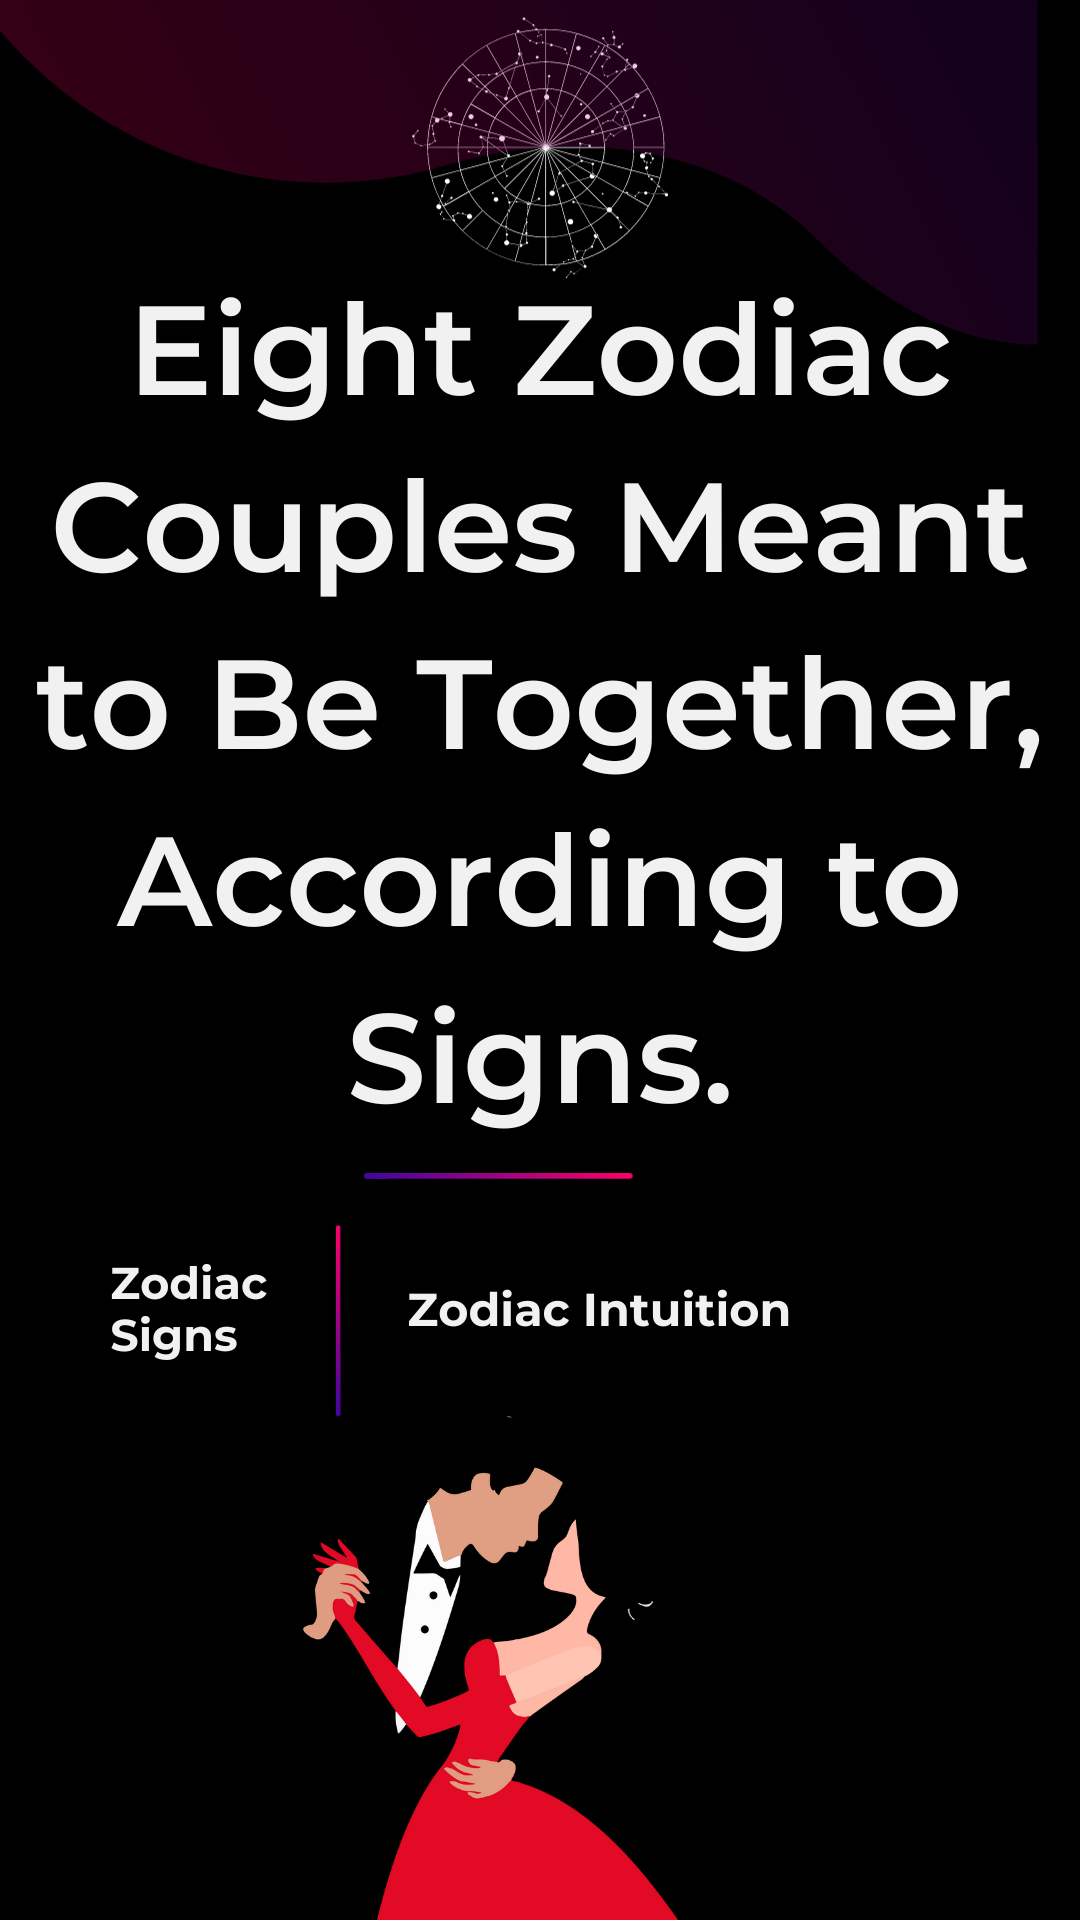 Eight Zodiac Couples Meant to Be Together, According to Signs.